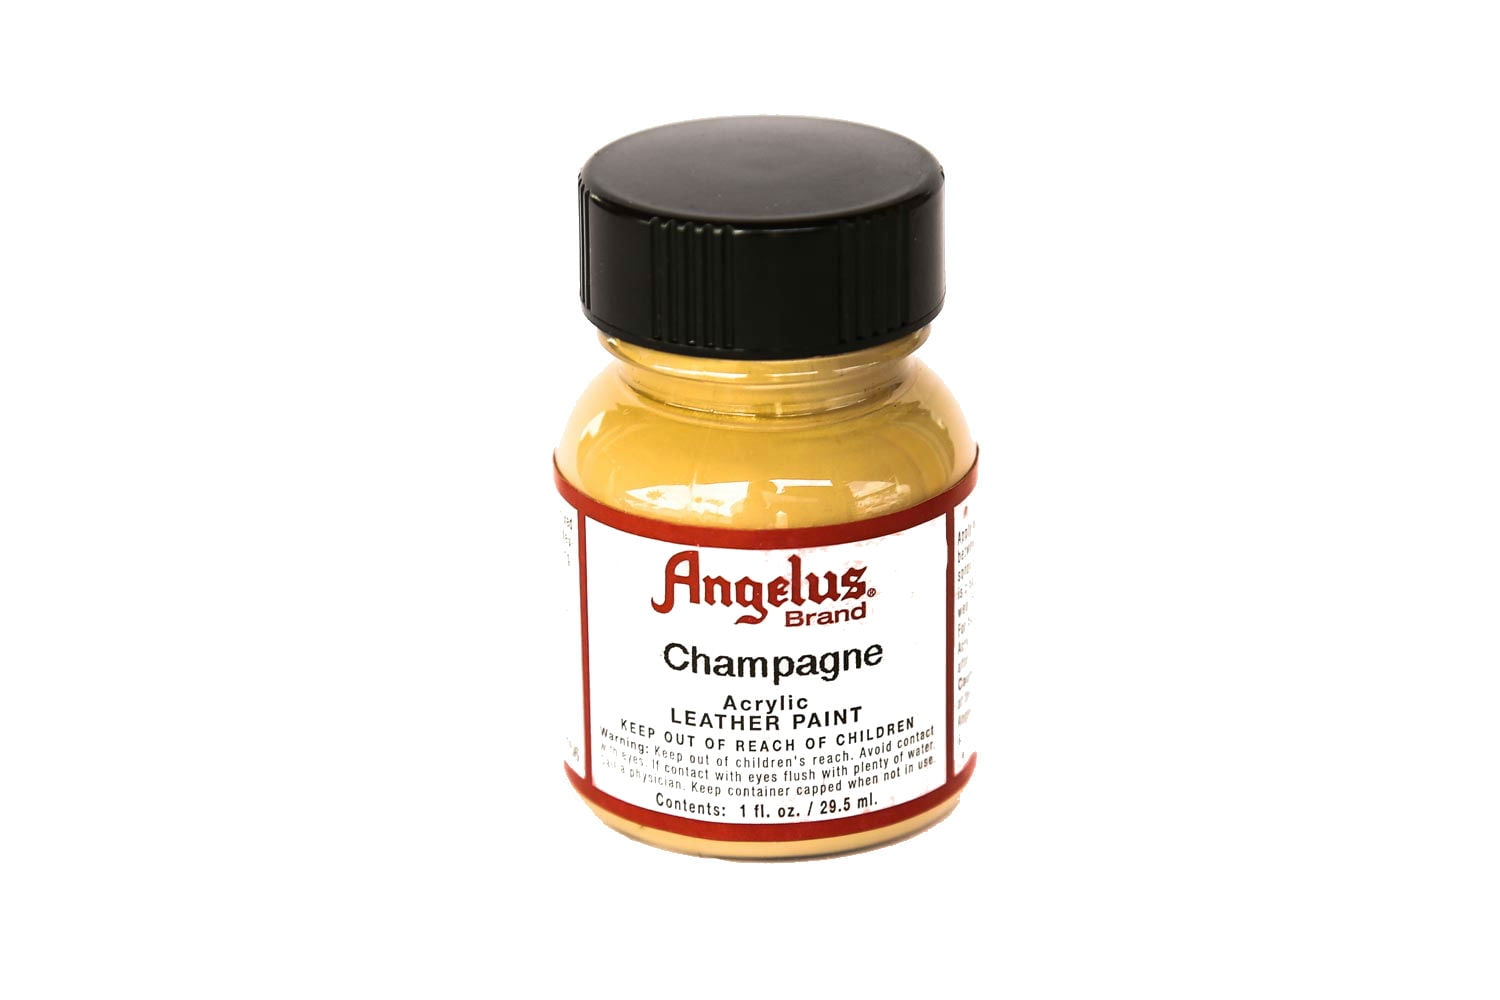 Angelus Acrylic Leather Paint Starter Kit - 12 colors in 1 oz